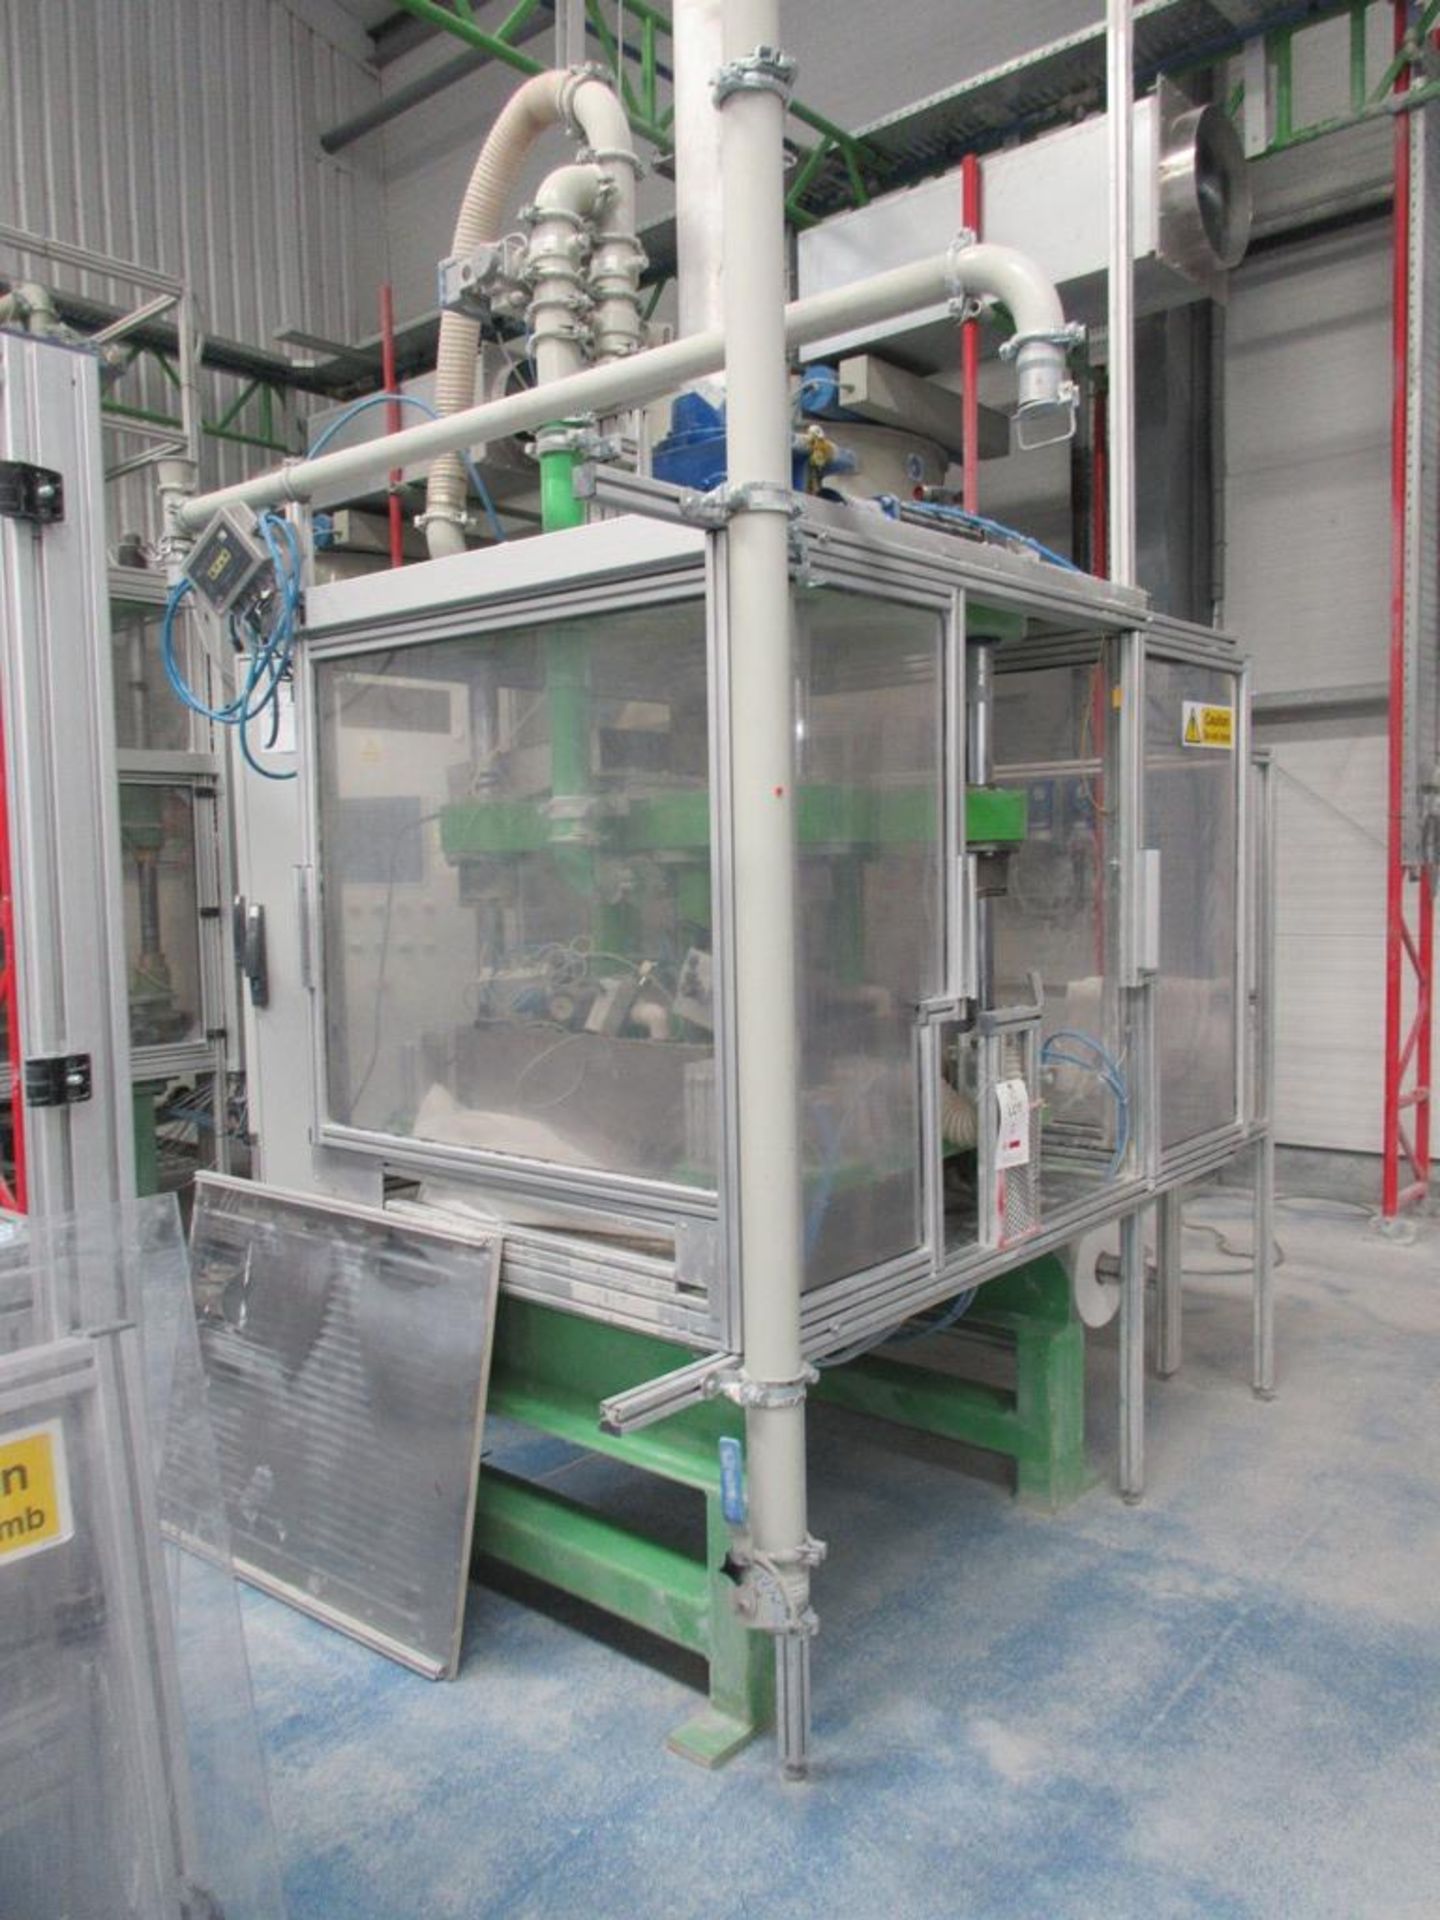 Gasbarre insulation board, 28 tonne electric press (no serial no.), bed size 680 x 980mm, working - Image 2 of 12